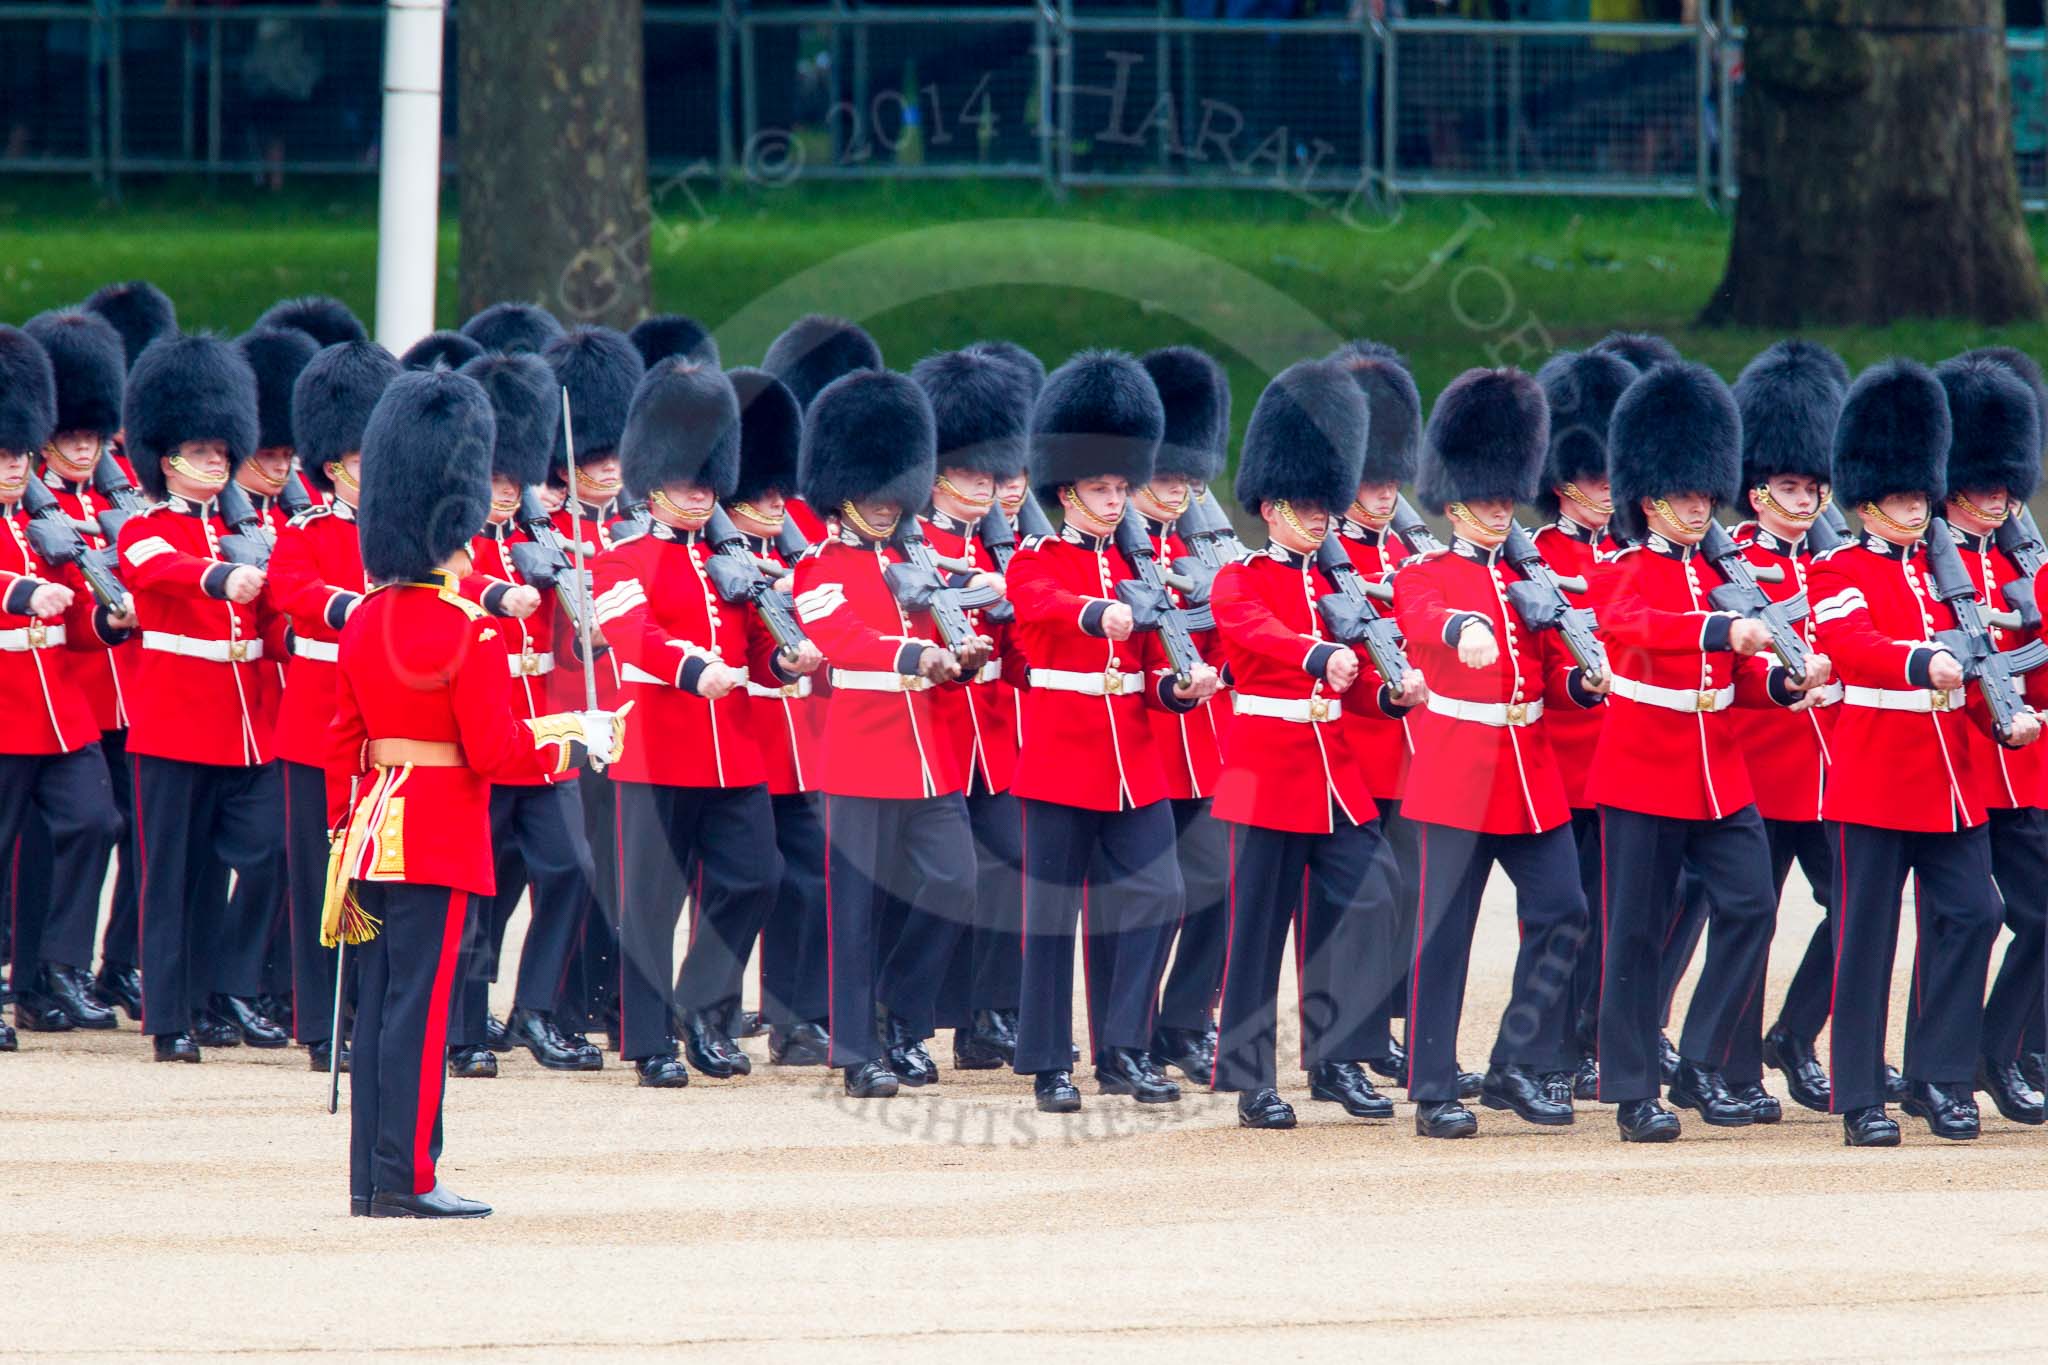 Trooping the Colour 2014.
Horse Guards Parade, Westminster,
London SW1A,

United Kingdom,
on 14 June 2014 at 10:24, image #127